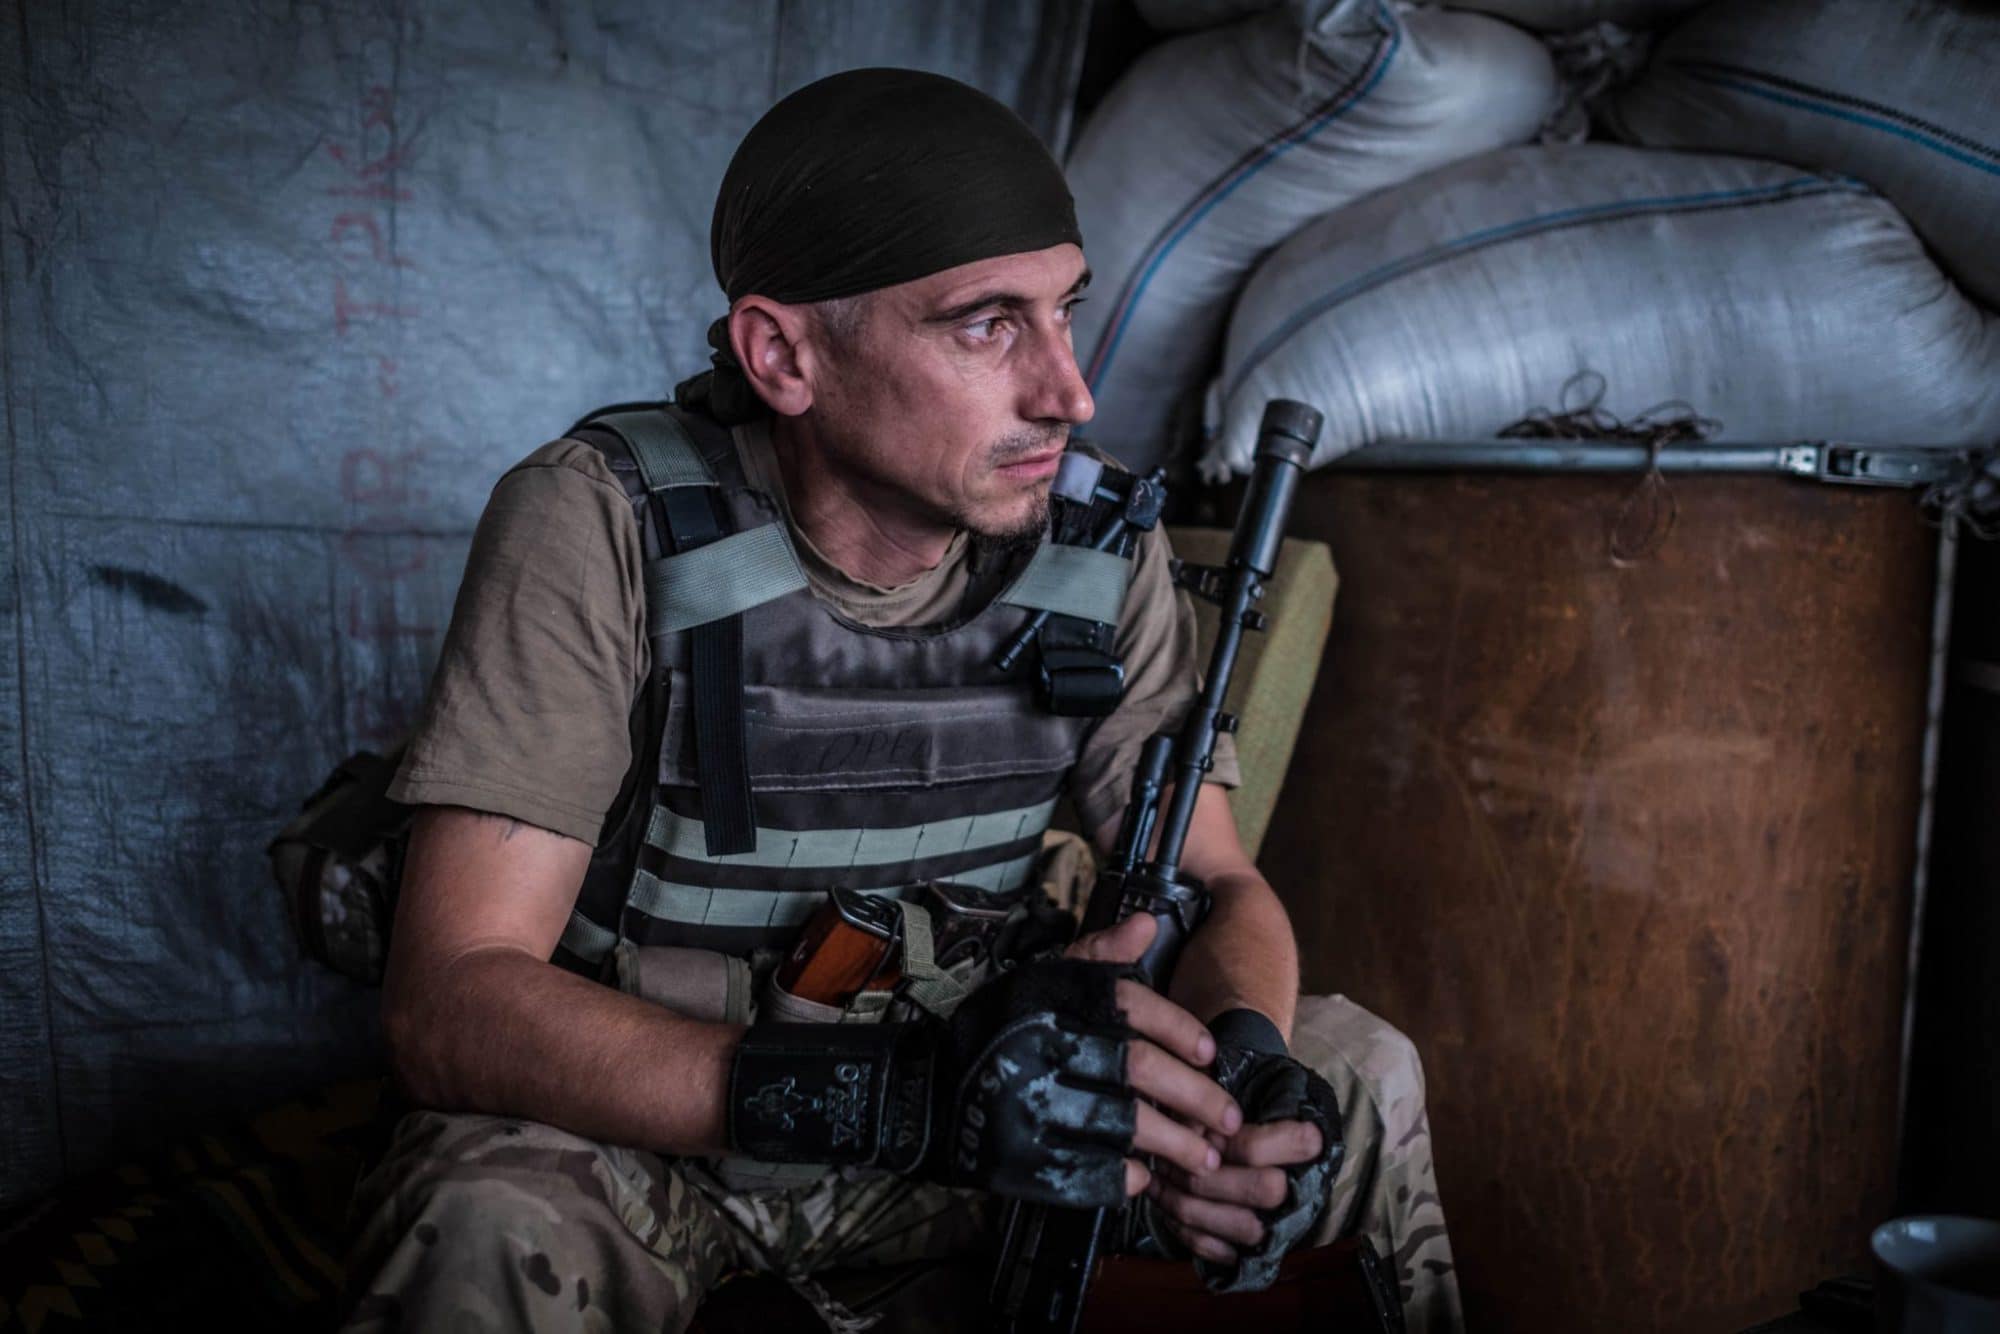 Soldier from "Ukraine's Voluntary Army", waiting at the front to the enemy